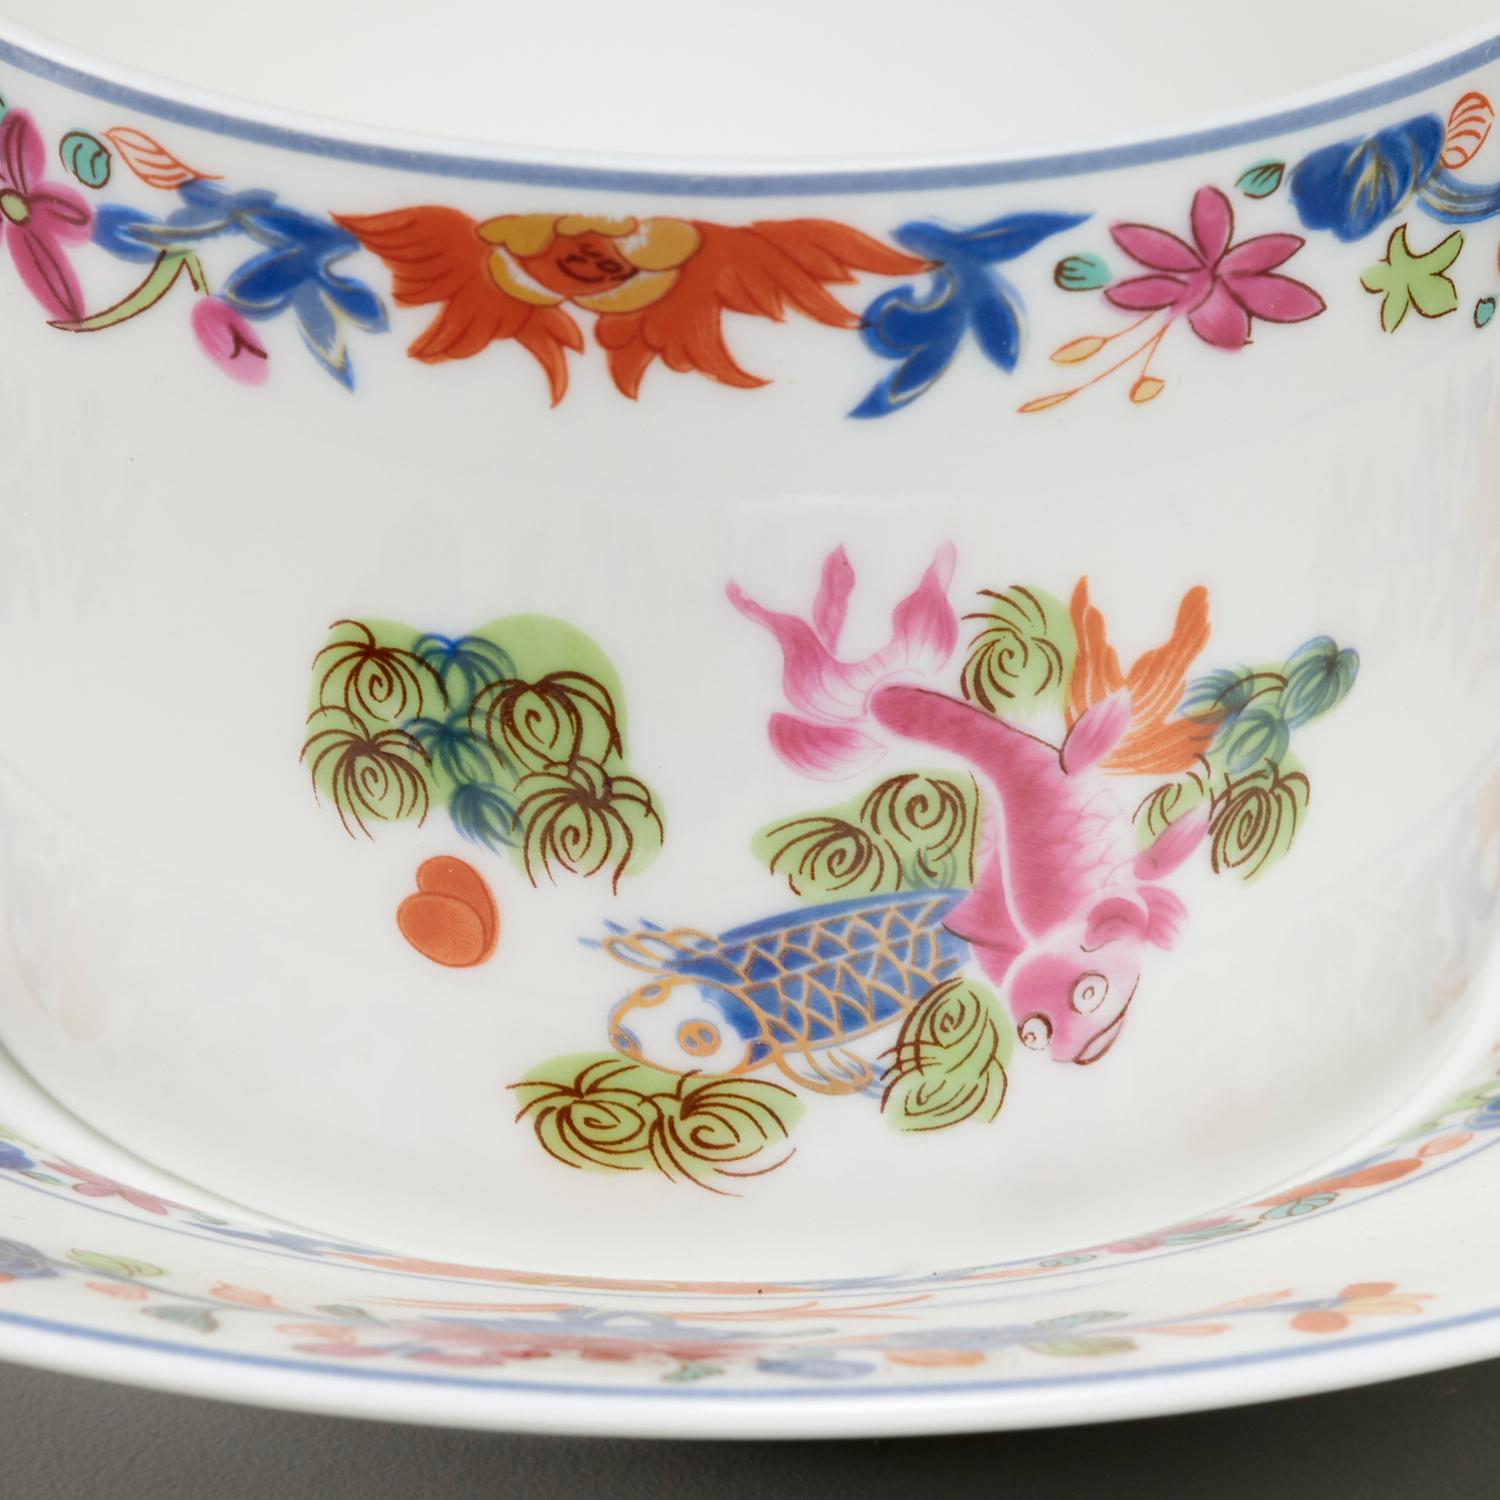 Polychromed 133 Piece House of Puiforcat Kiang She Dinner Service for 12 by Limoges, France For Sale